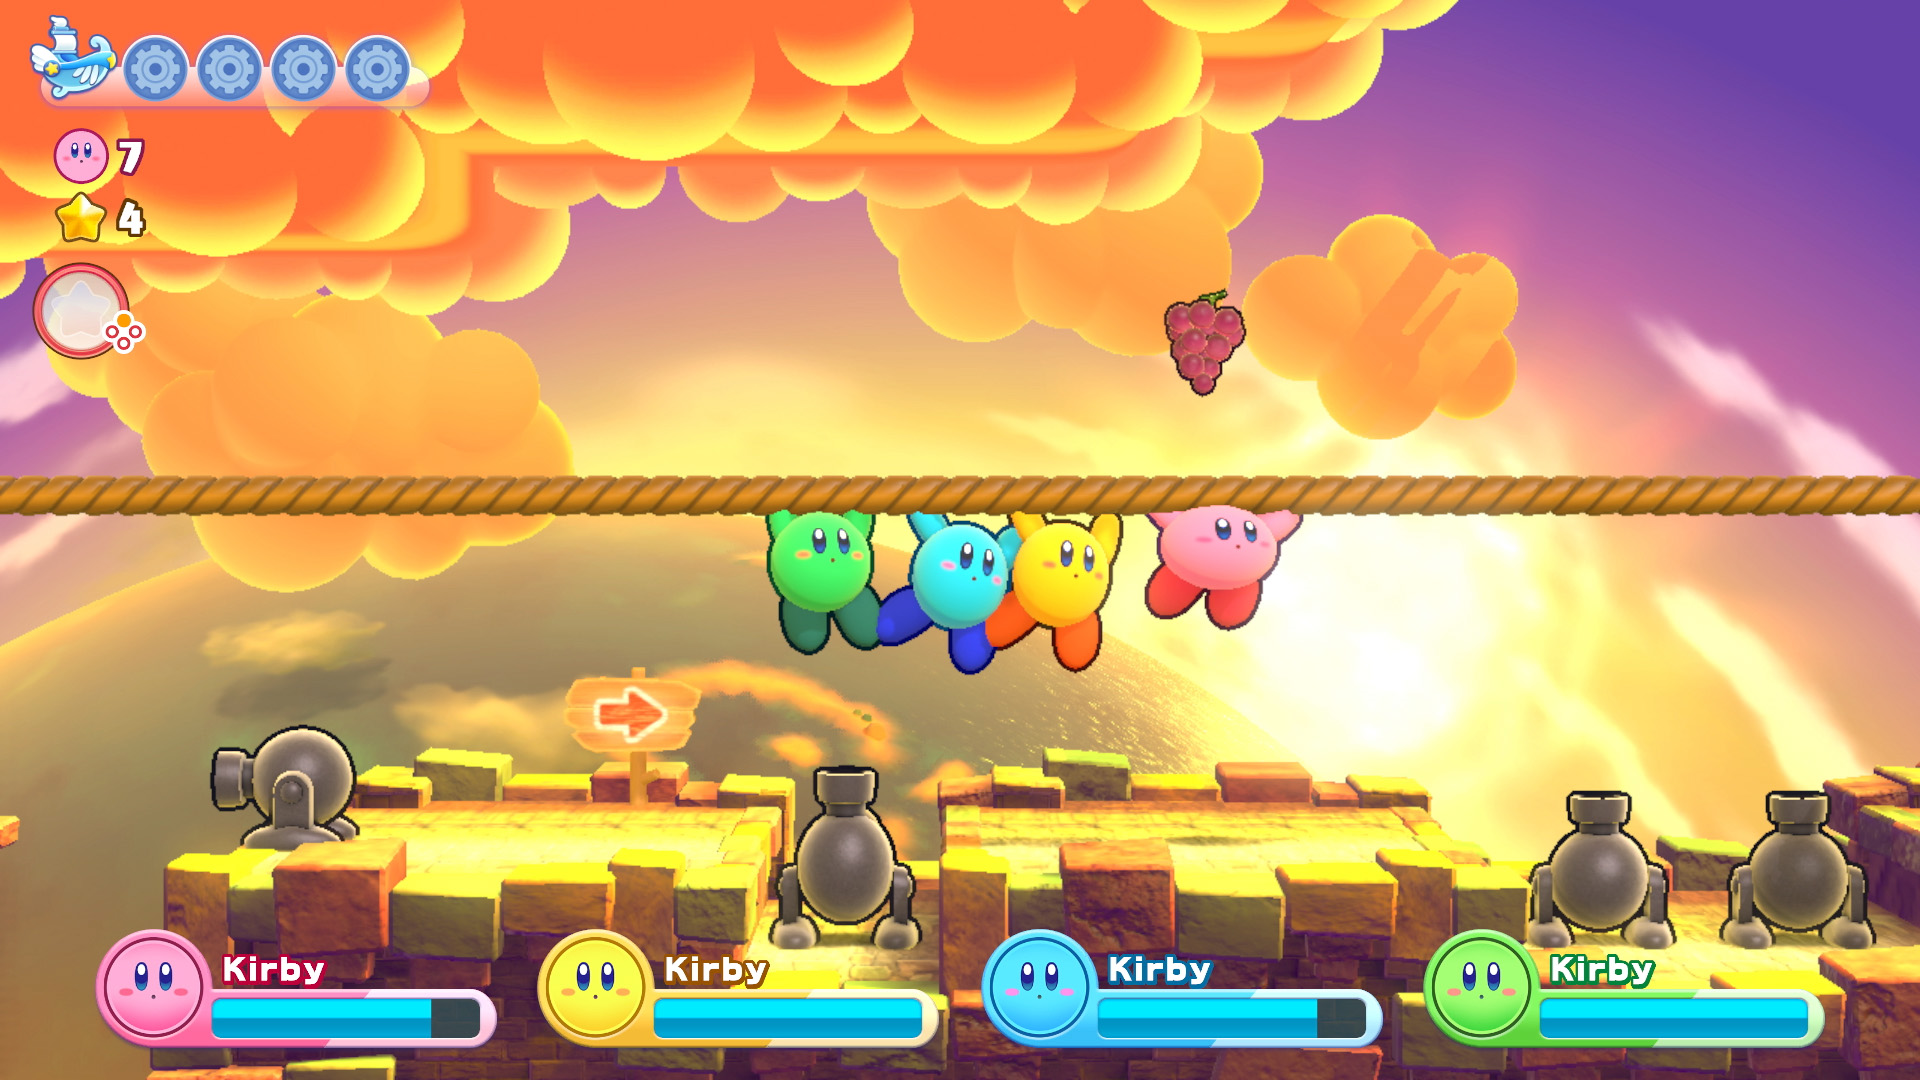 Kirby's Return to Dream Land Deluxe Nintendo Switch Account pixelpuffin.net Activation Link 37.28 $